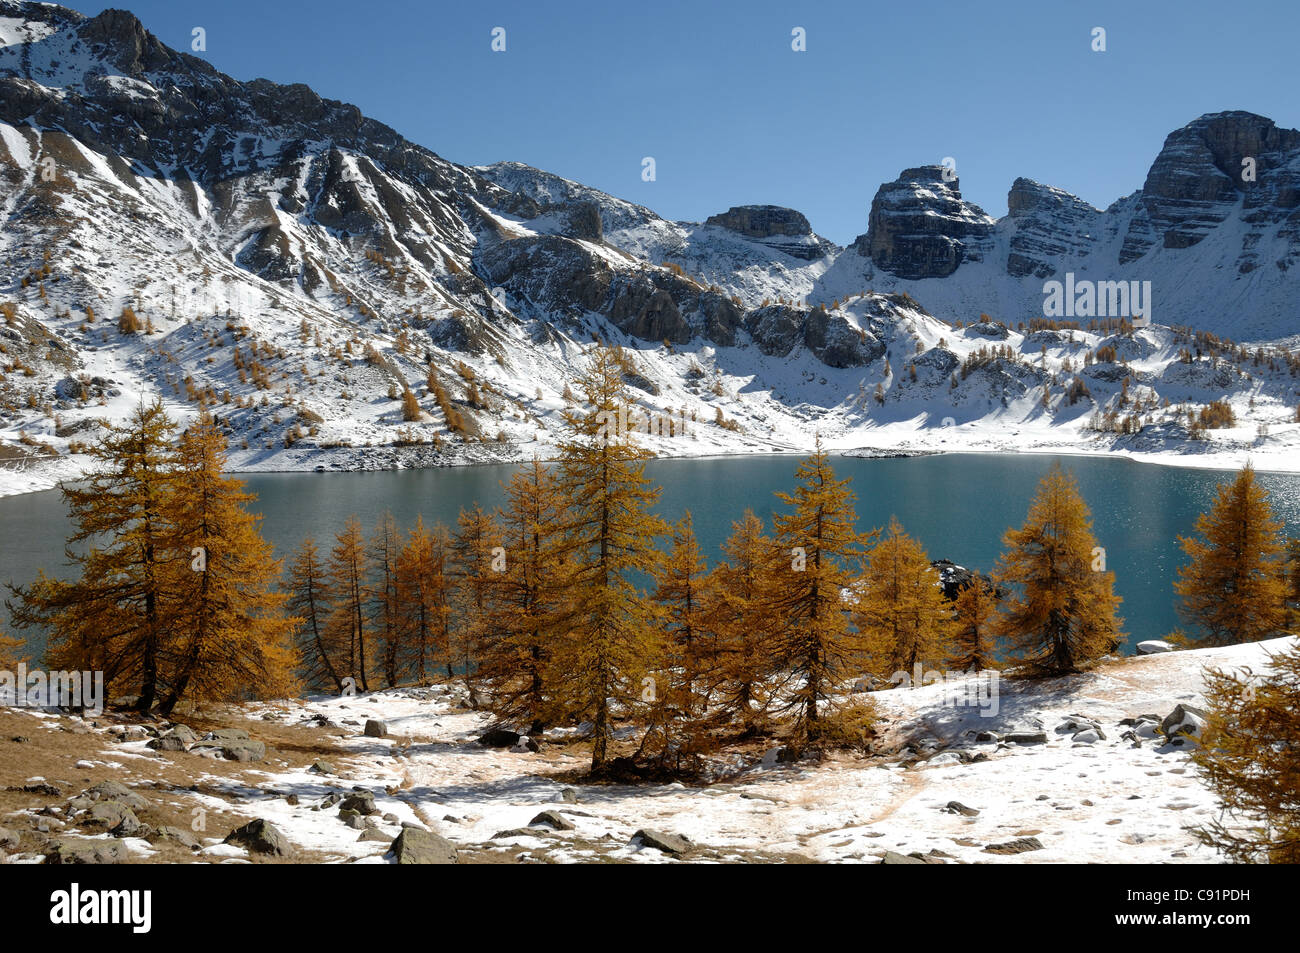 Winter View of Lake Allos or Lac d'Allos in the Mercantour National Park with Autumn European Larches, Larix decidua, Southern French Alps, France Stock Photo